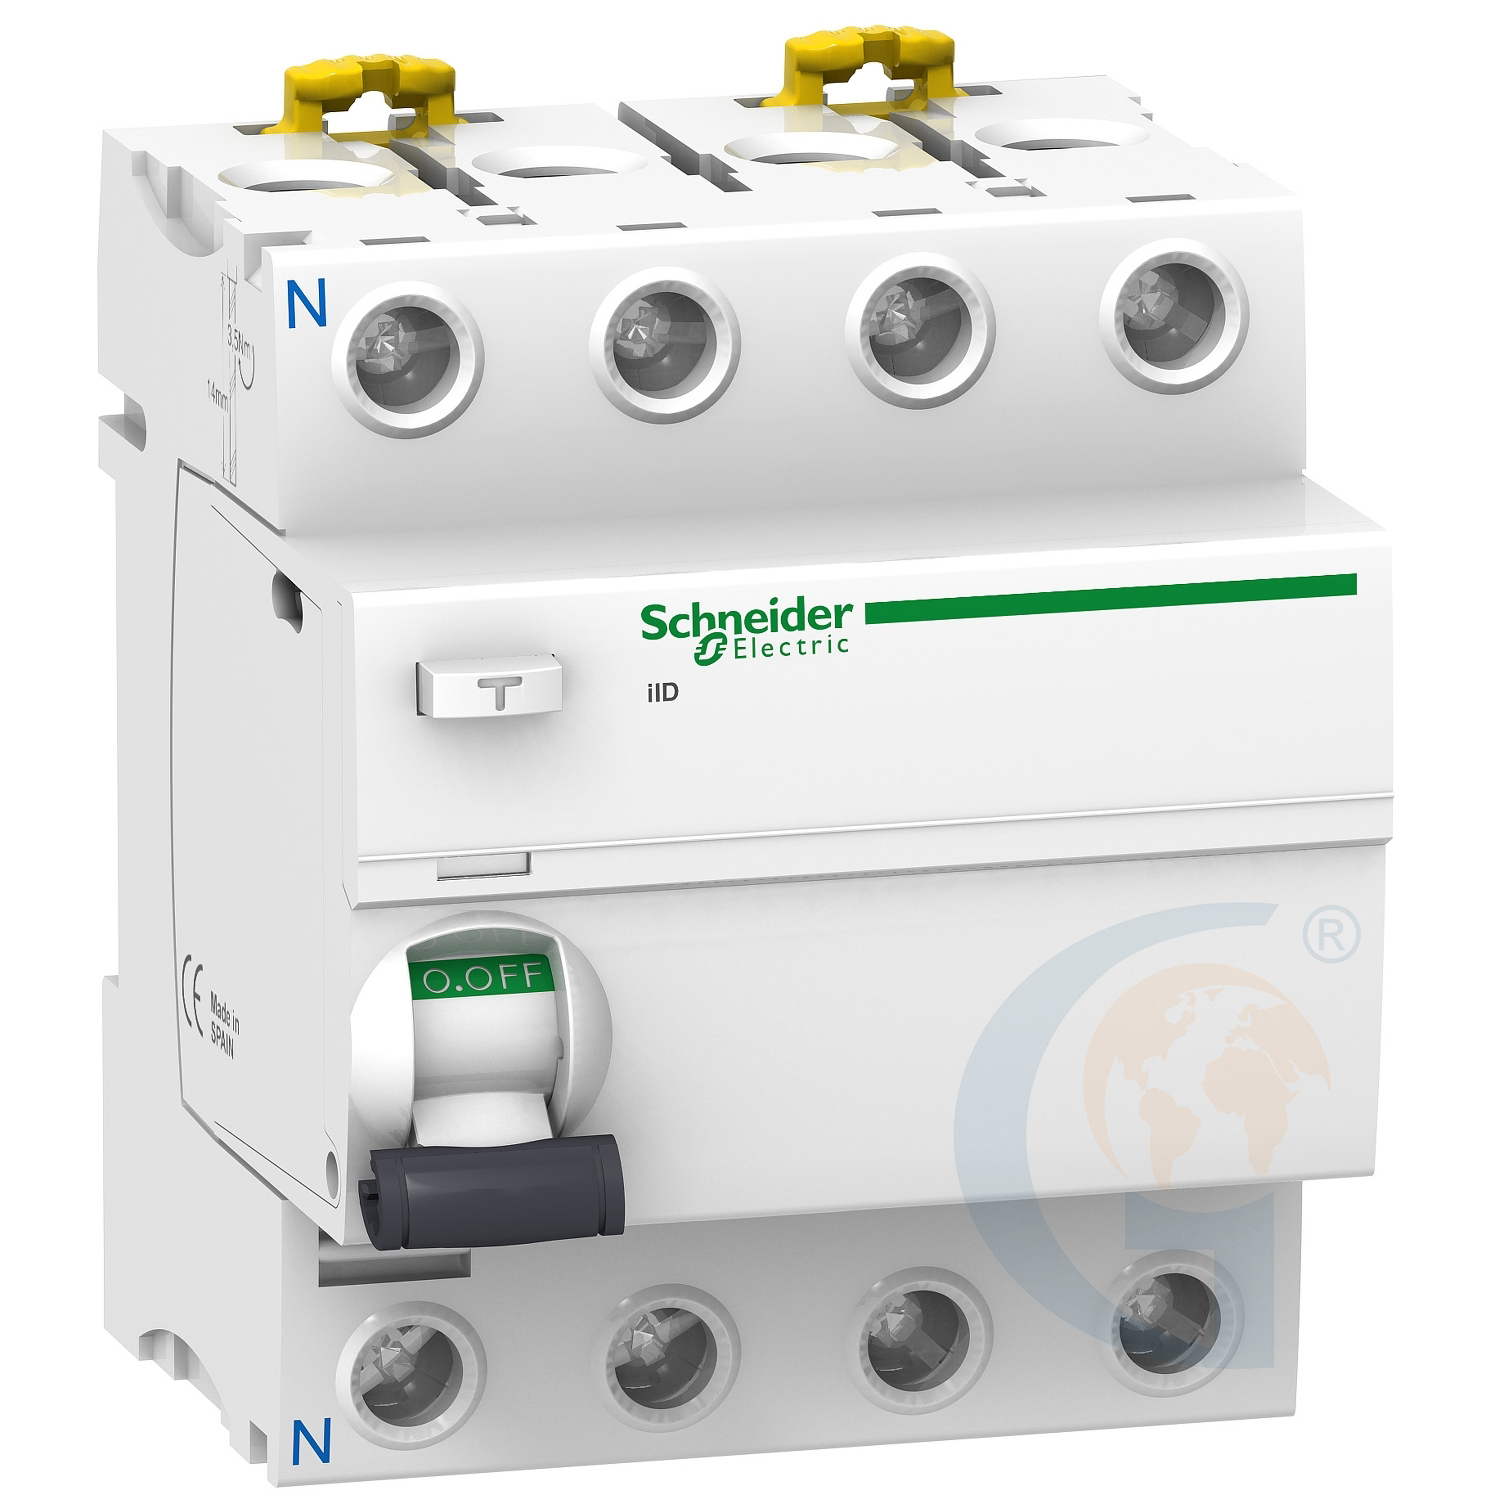 Schneider Electric A9R17440 ACTI 9 IID – RCCB – 4P – 40A – 500MA S – TYPE AC https://gesrepair.com/wp-content/uploads/2020/Schneider/Schneider_Electric_A9R17440_.jpg